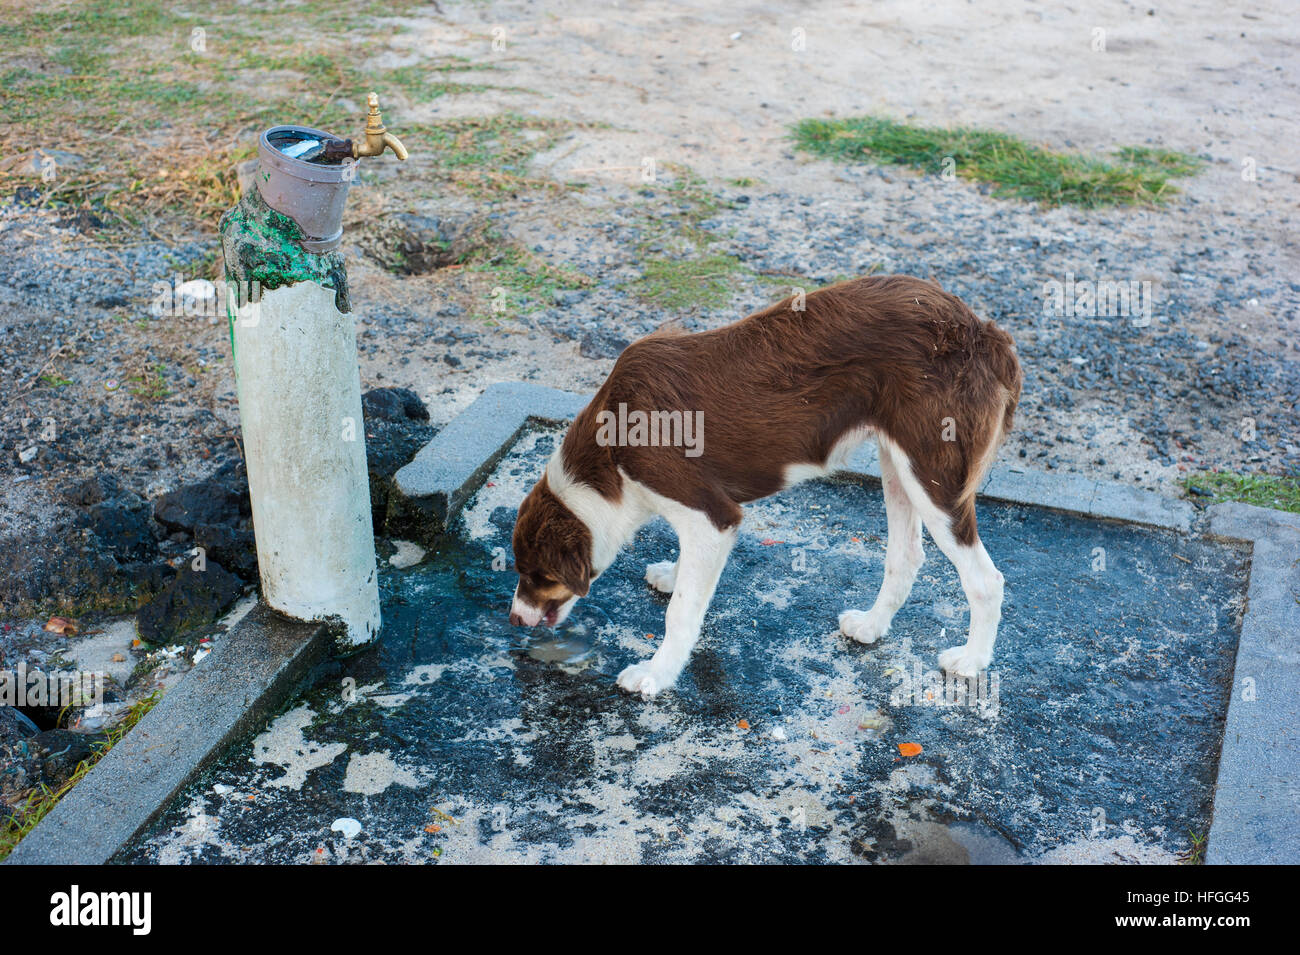 A thirsty dog drinking water from a tap in Mauritius. Stock Photo